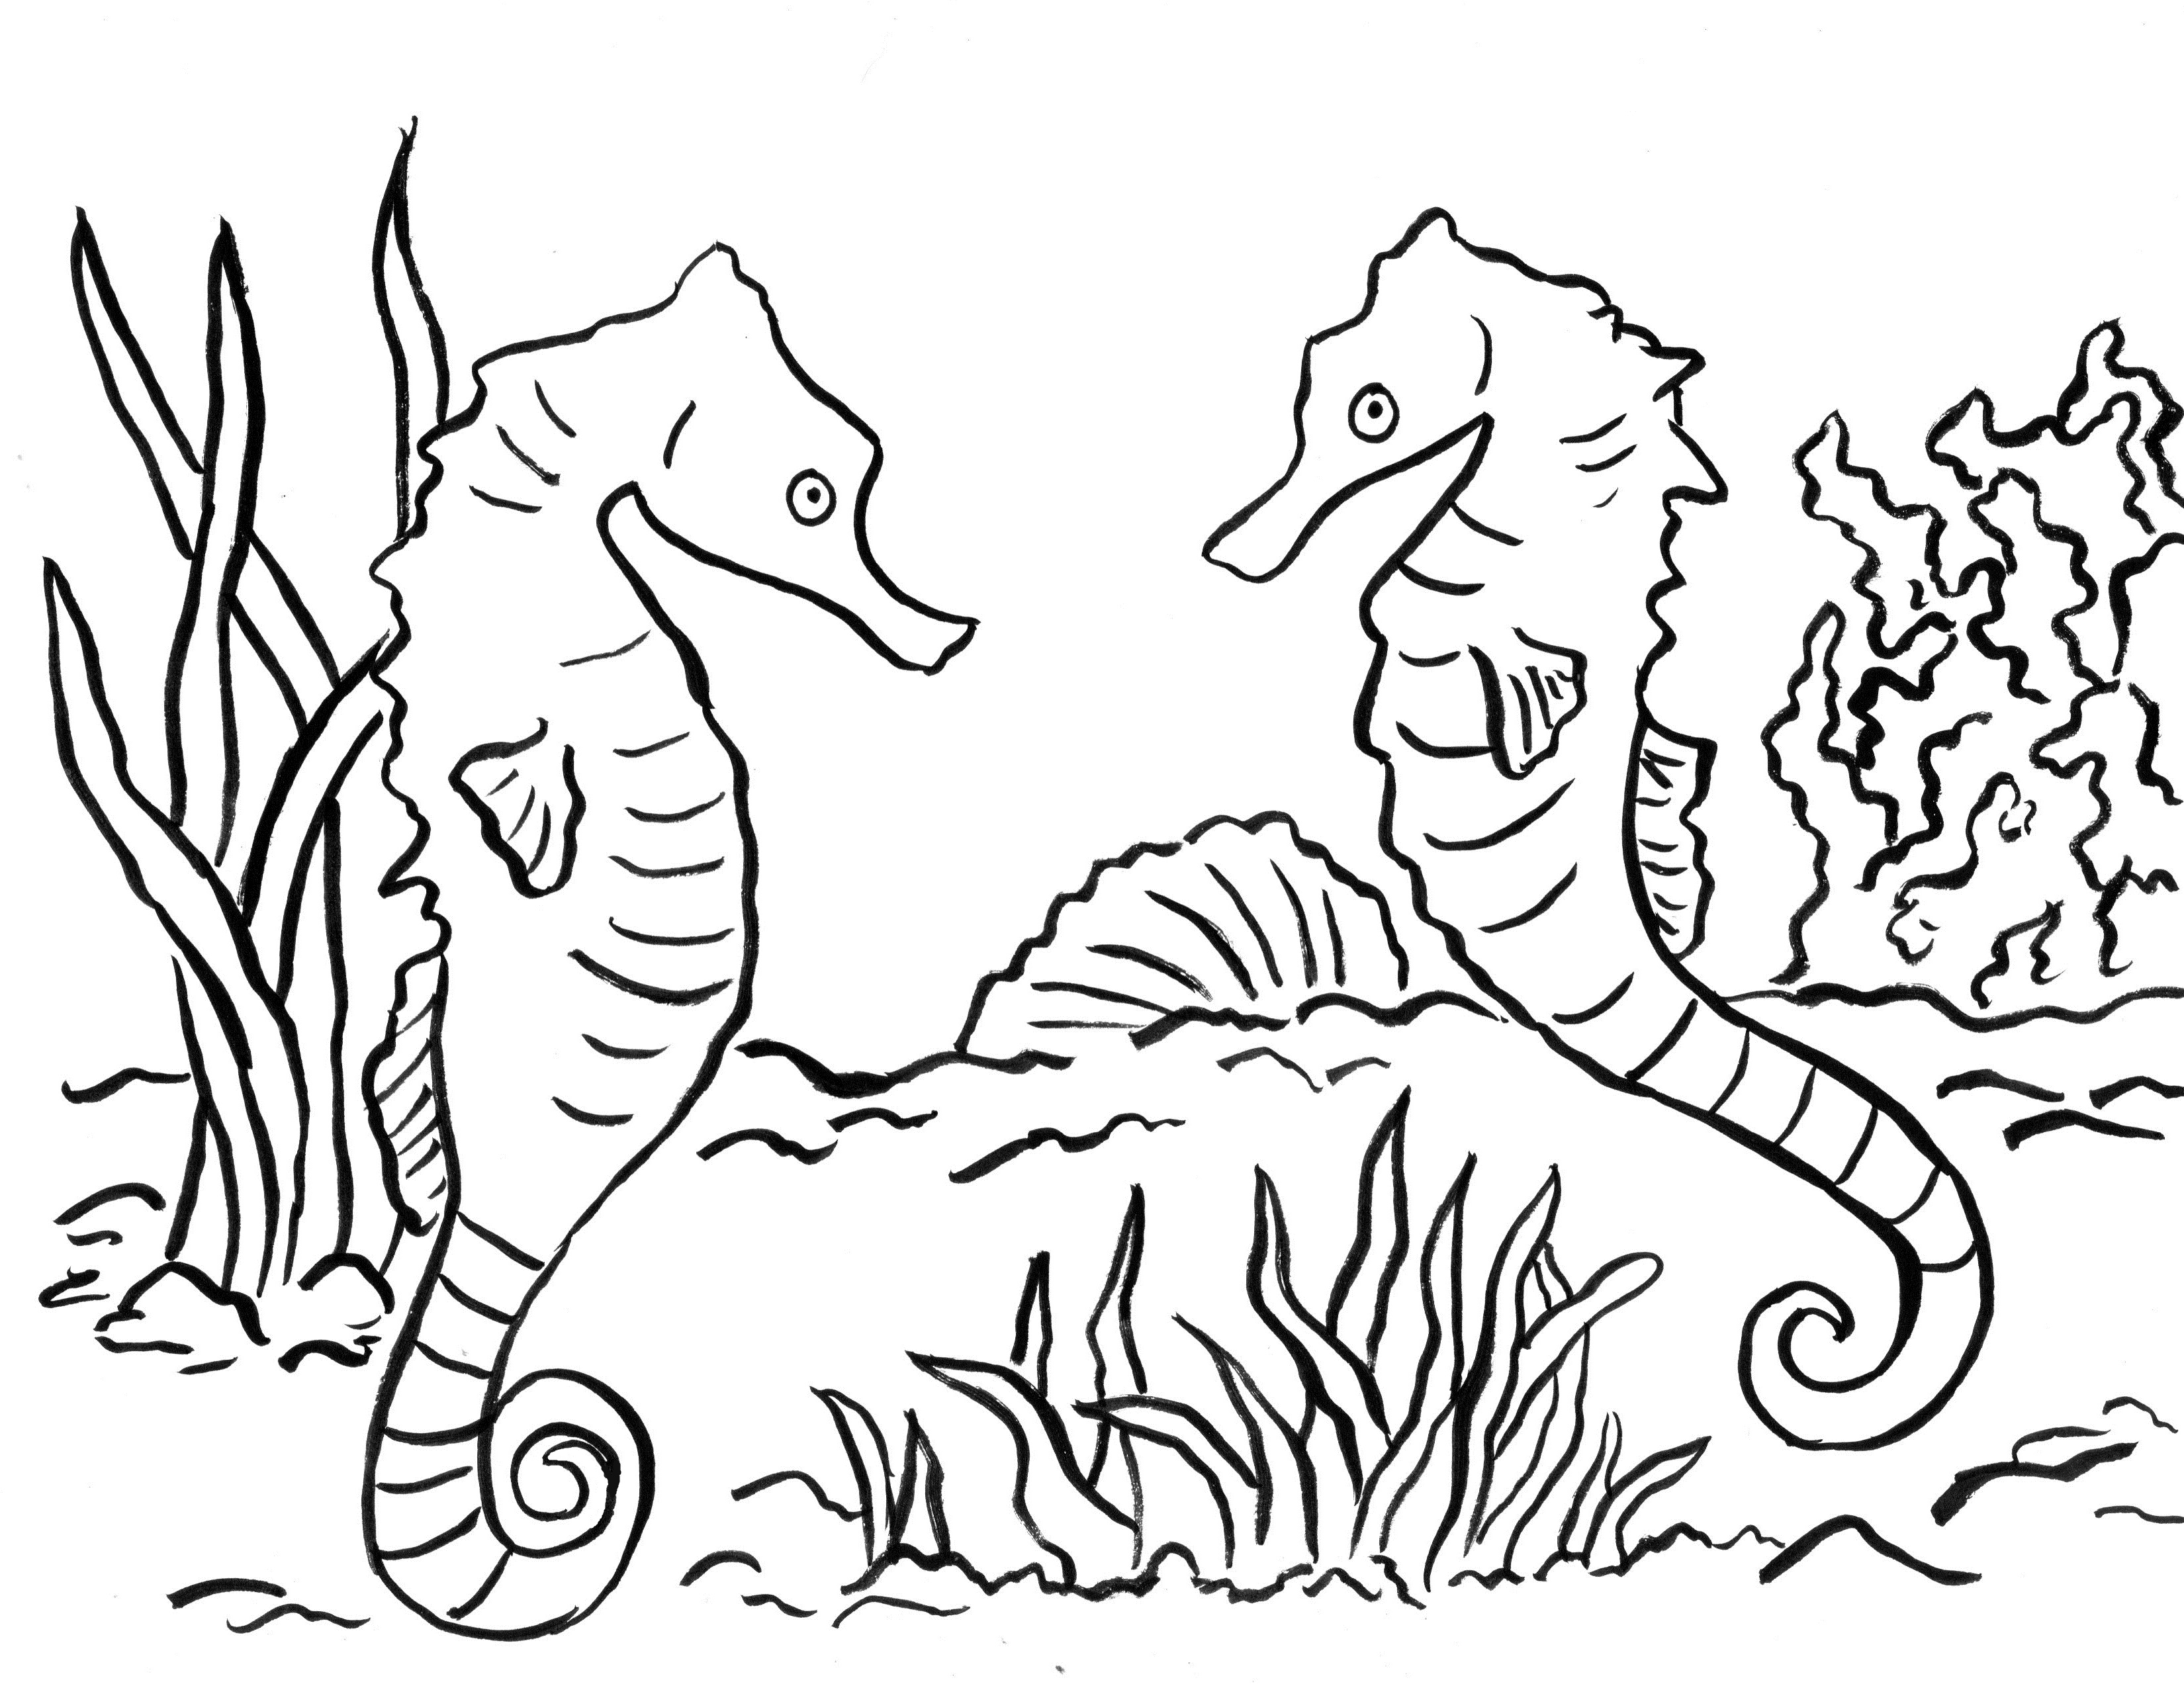 Seahorse Coloring Page - Art Starts